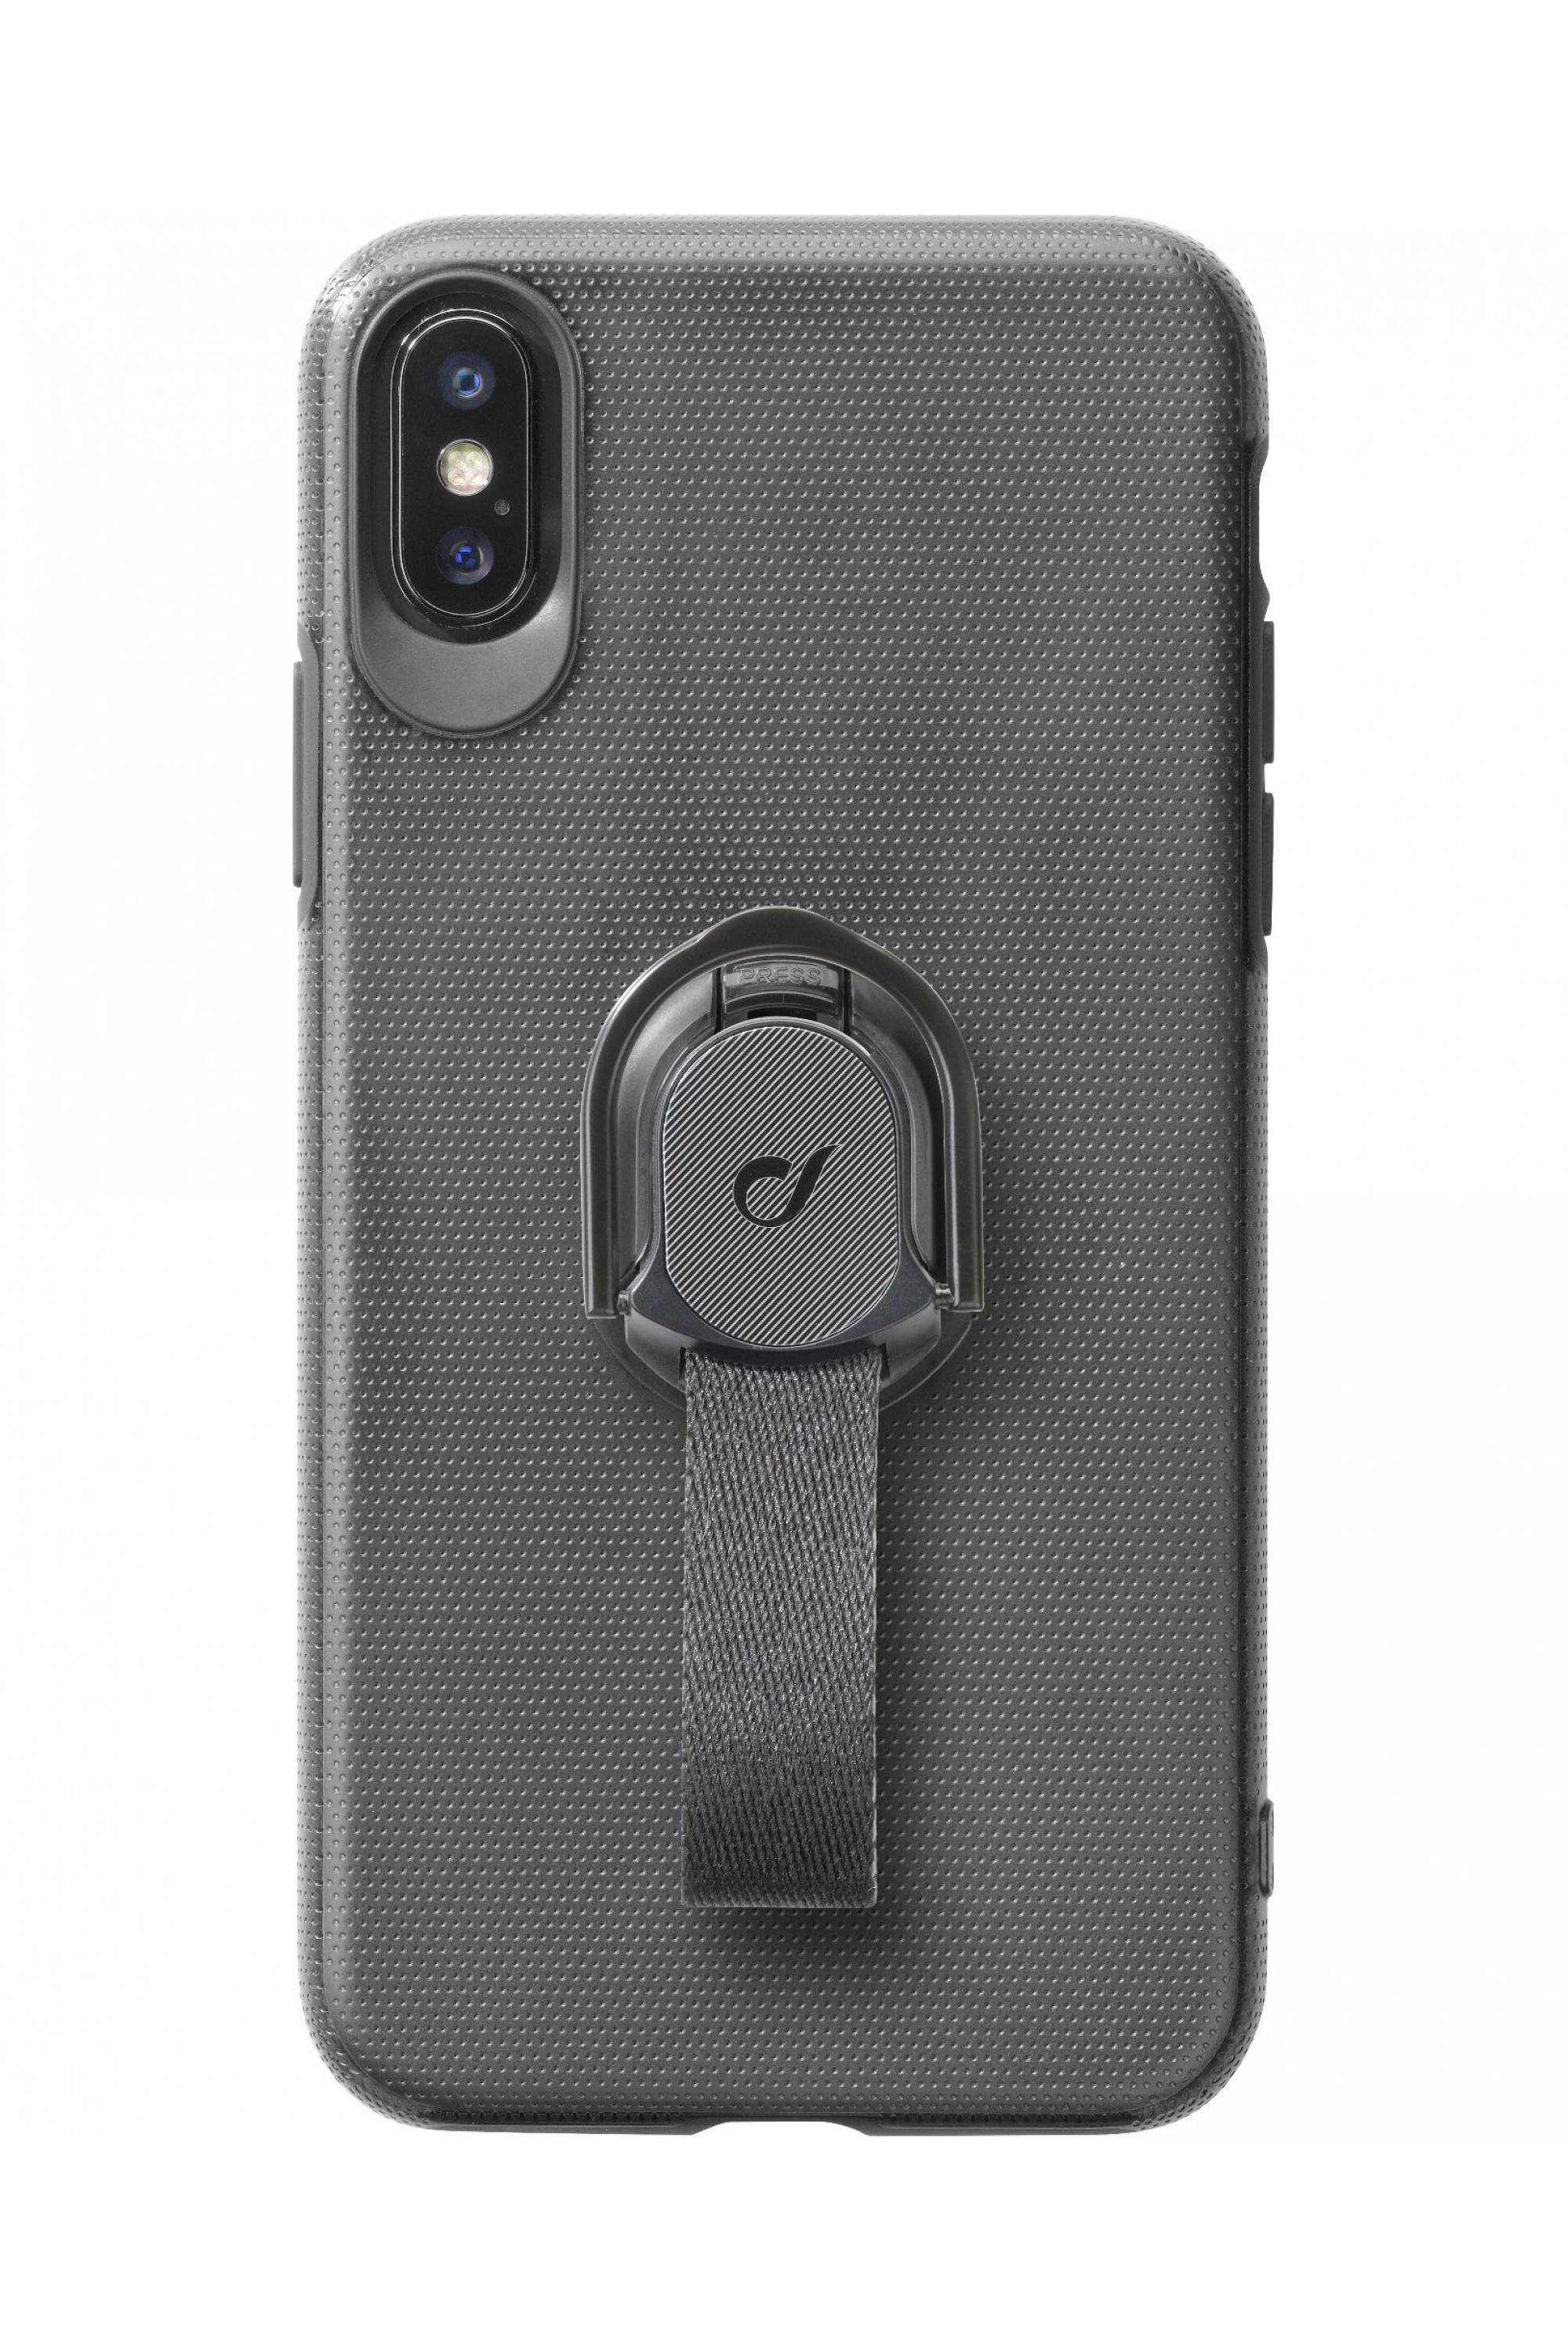 CellularLine Case Black with Fingerloop for iPhone XS Max